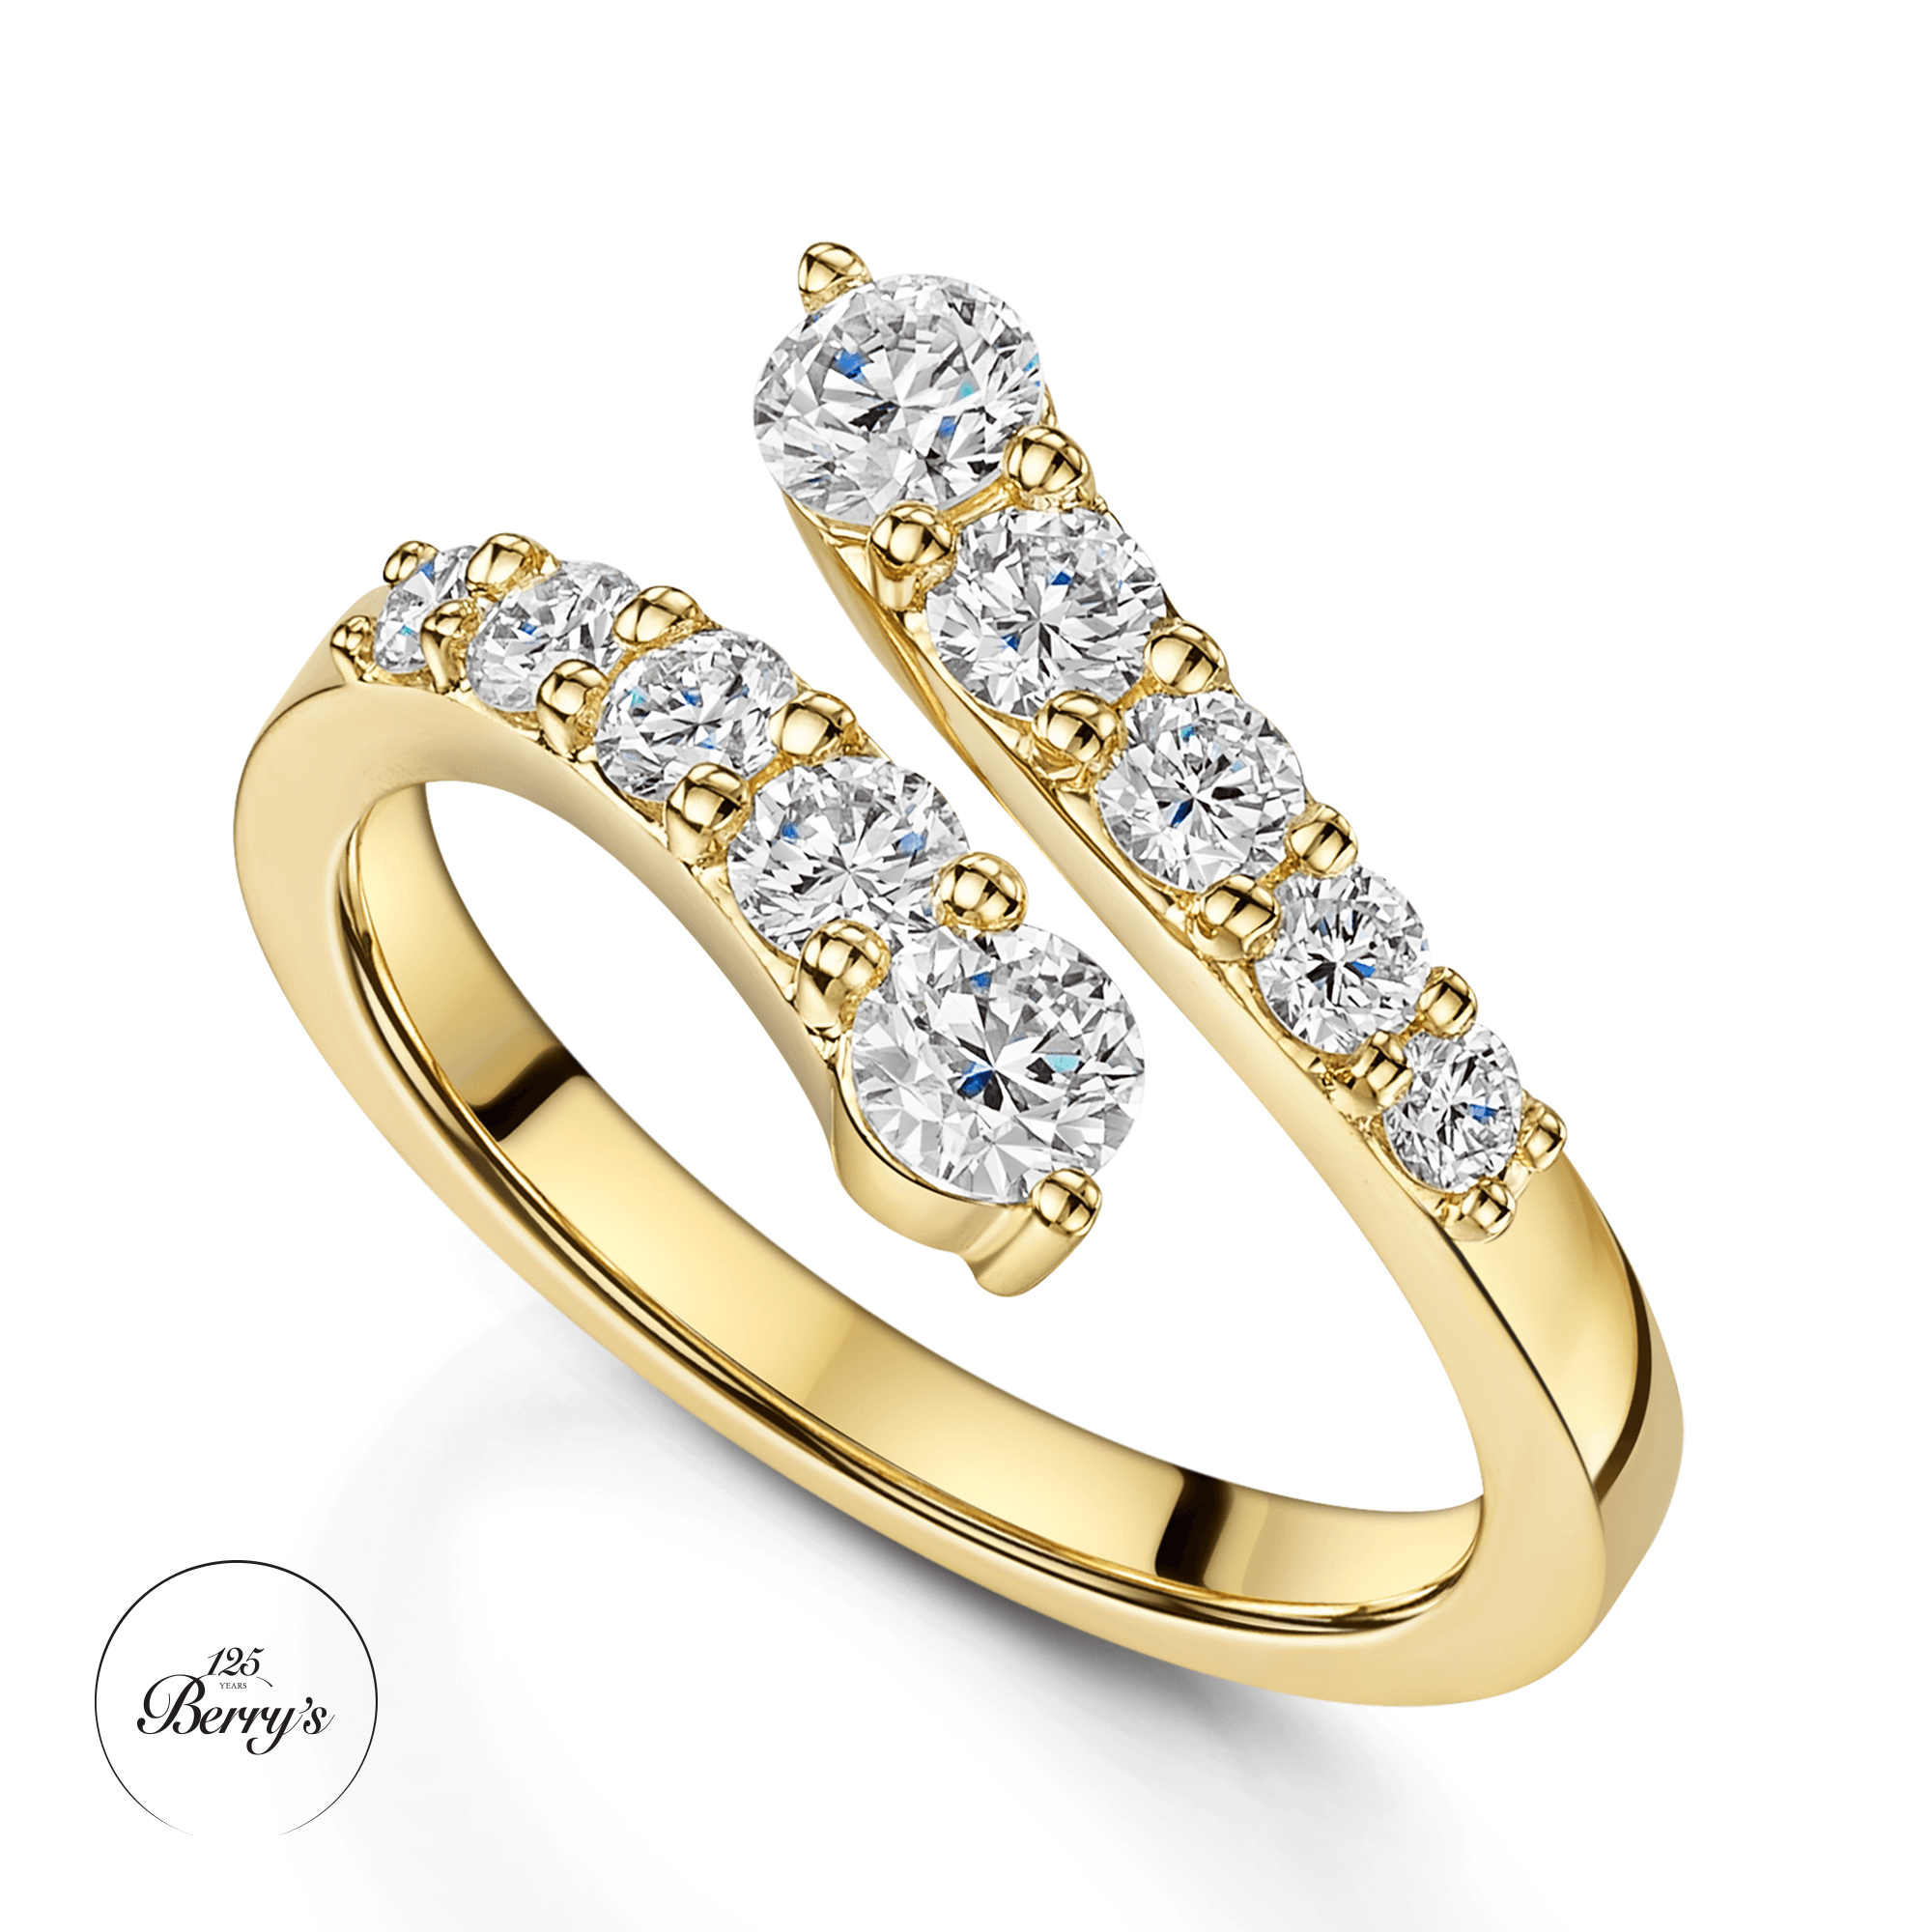 OPEIA Collection 18ct Yellow Gold Round Brilliant Cut Diamond Fancy Single Row Cross Over Ring